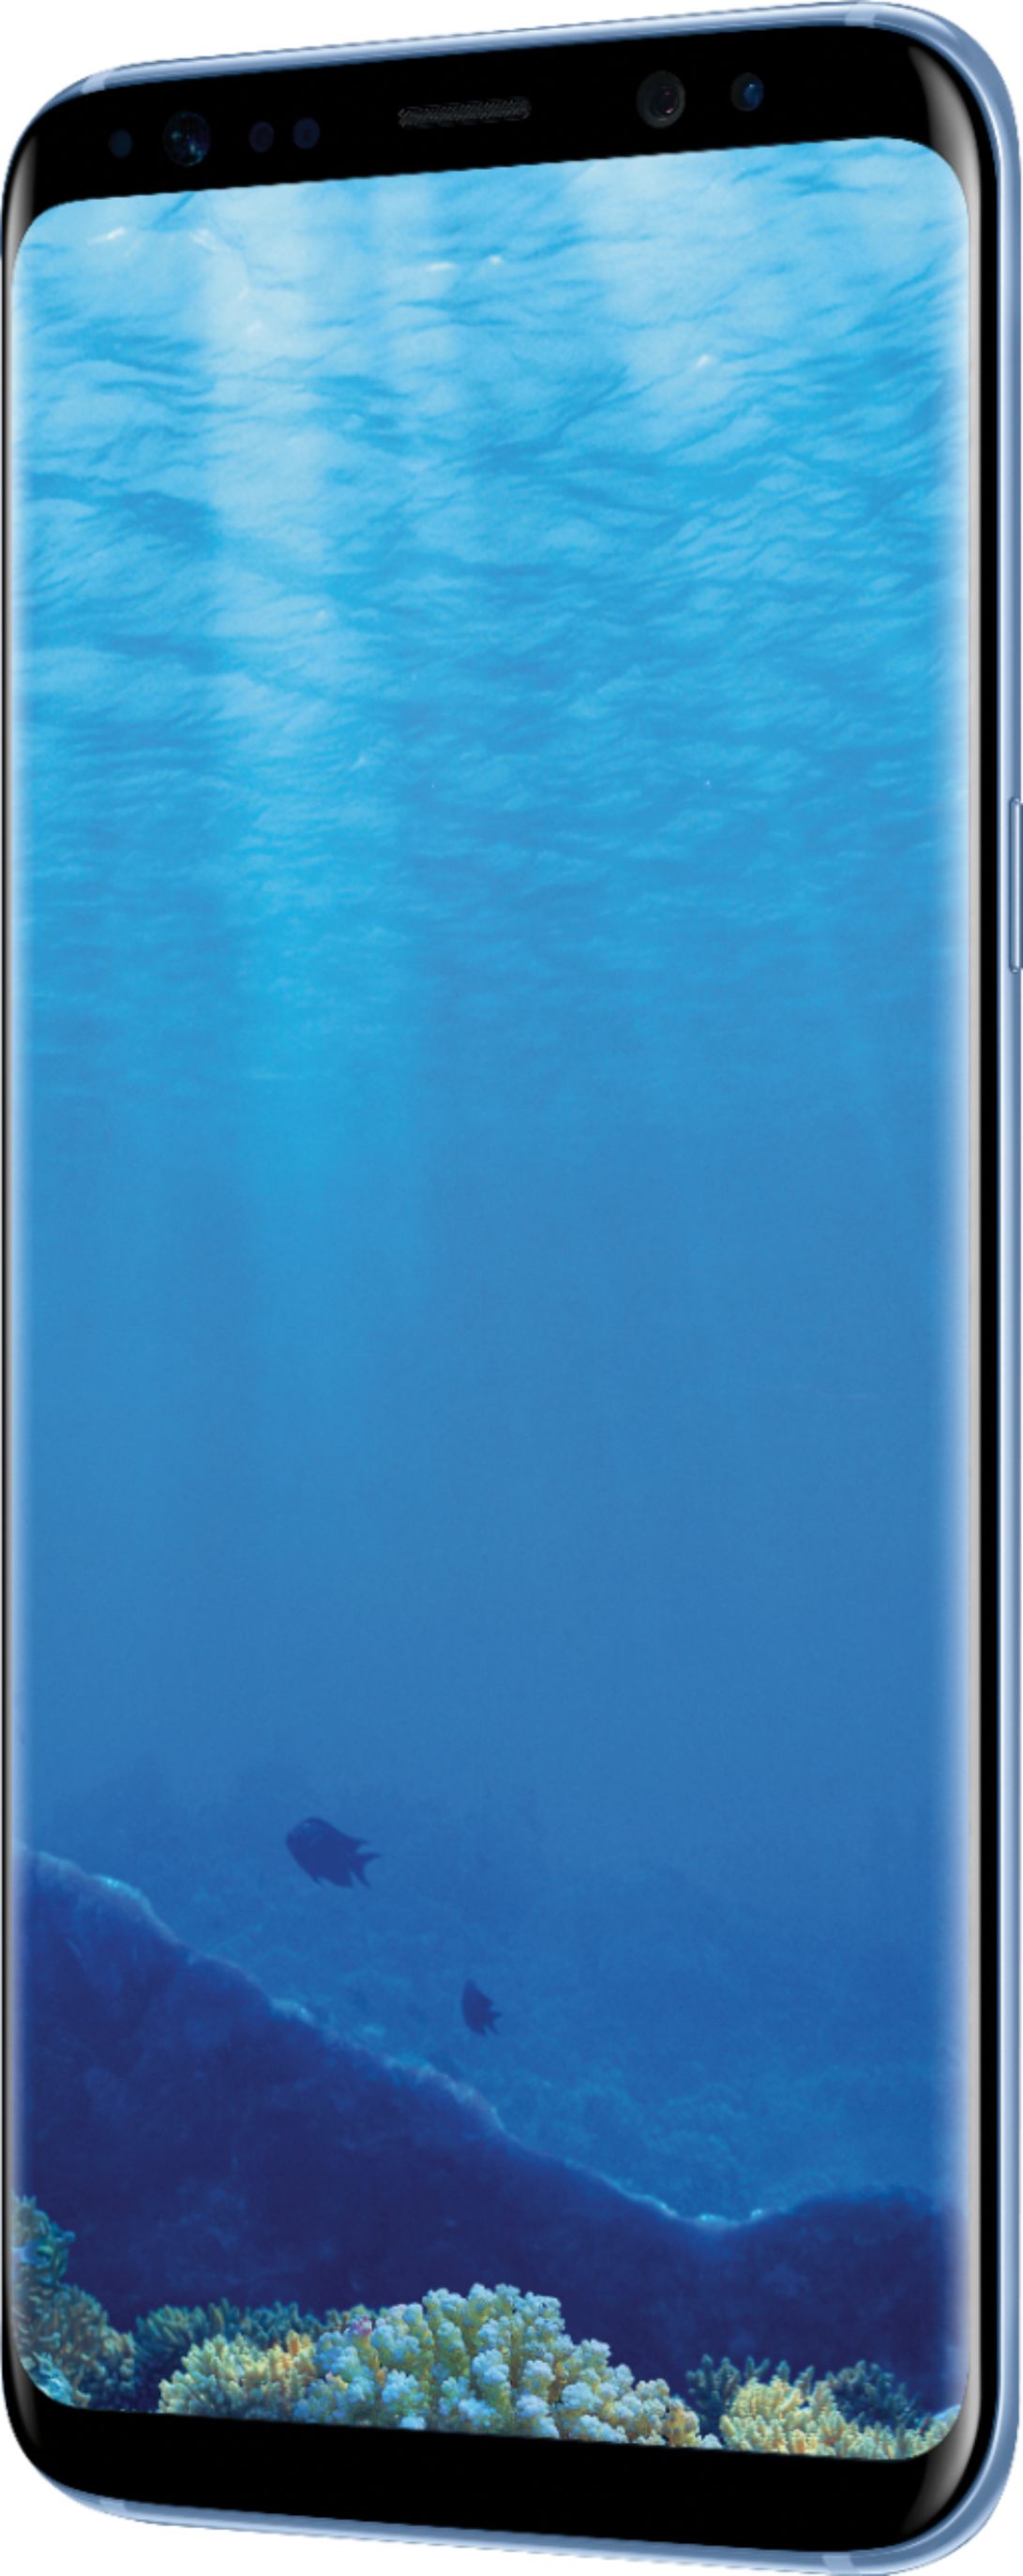 Left View: Samsung - Refurbished Galaxy S8 4G LTE with 64GB Memory Cell Phone (Unlocked) - Coral Blue